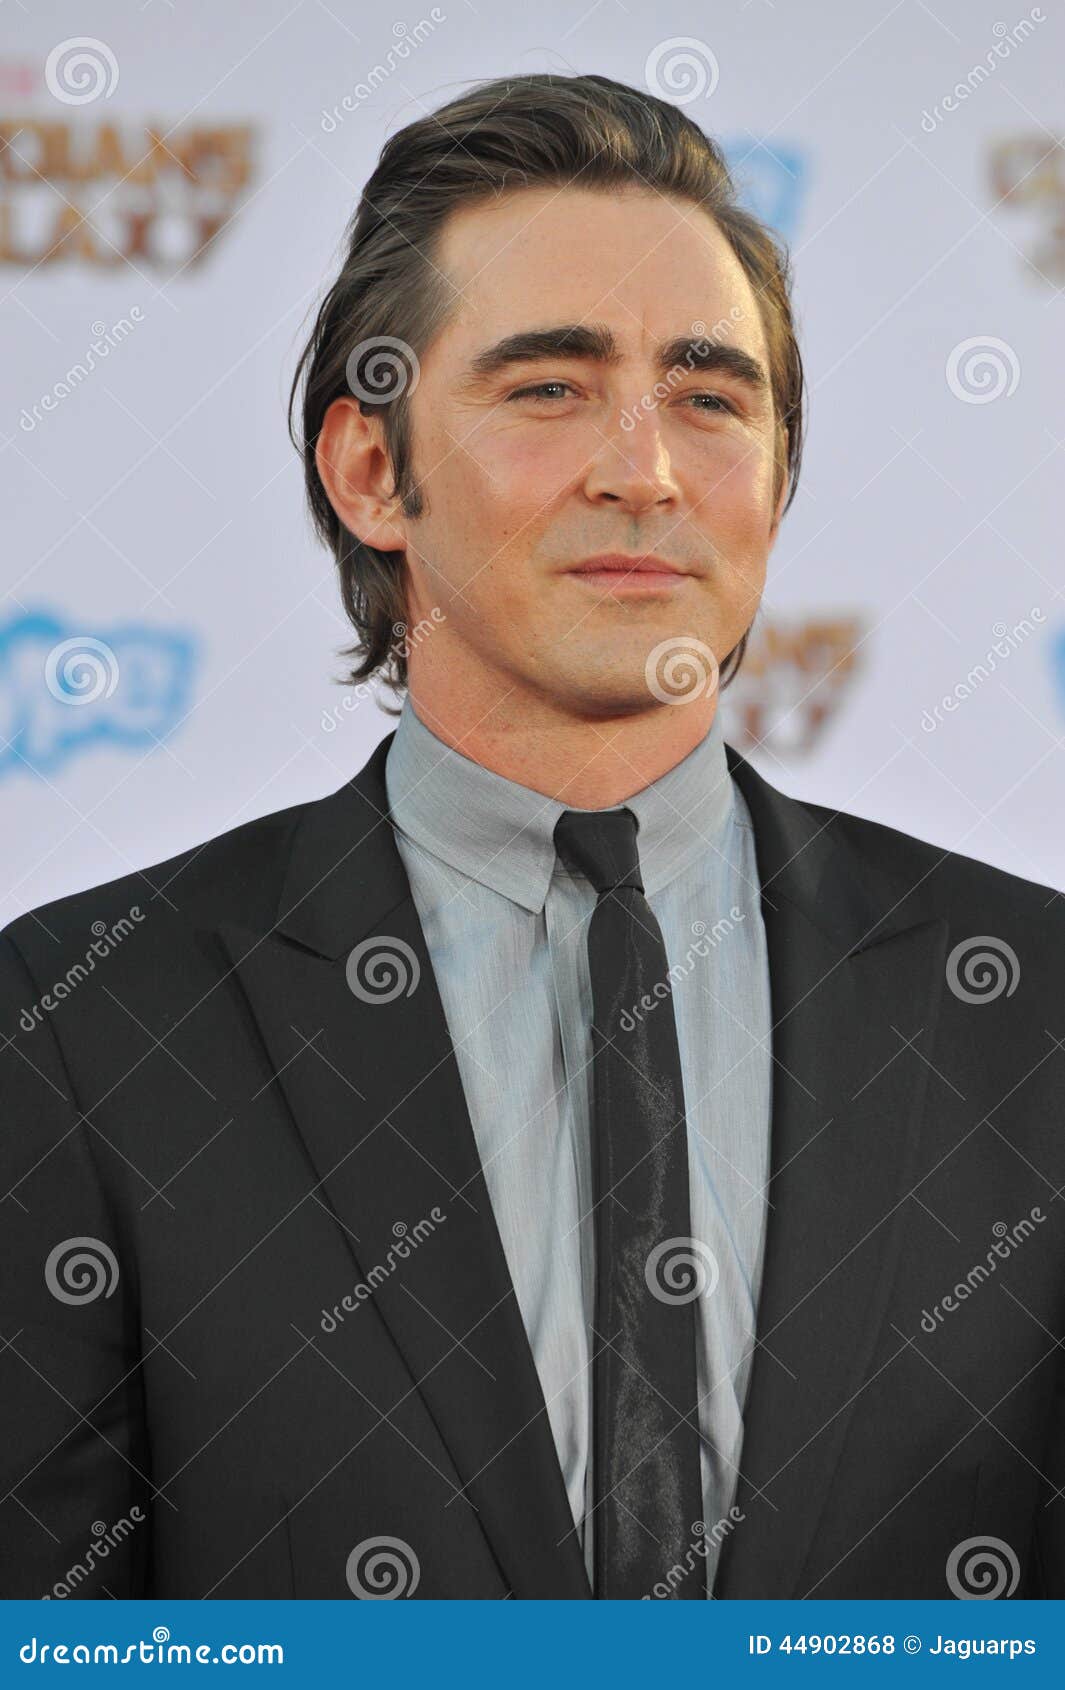 Lee Pace editorial stock photo. Image of suit, event - 44902868